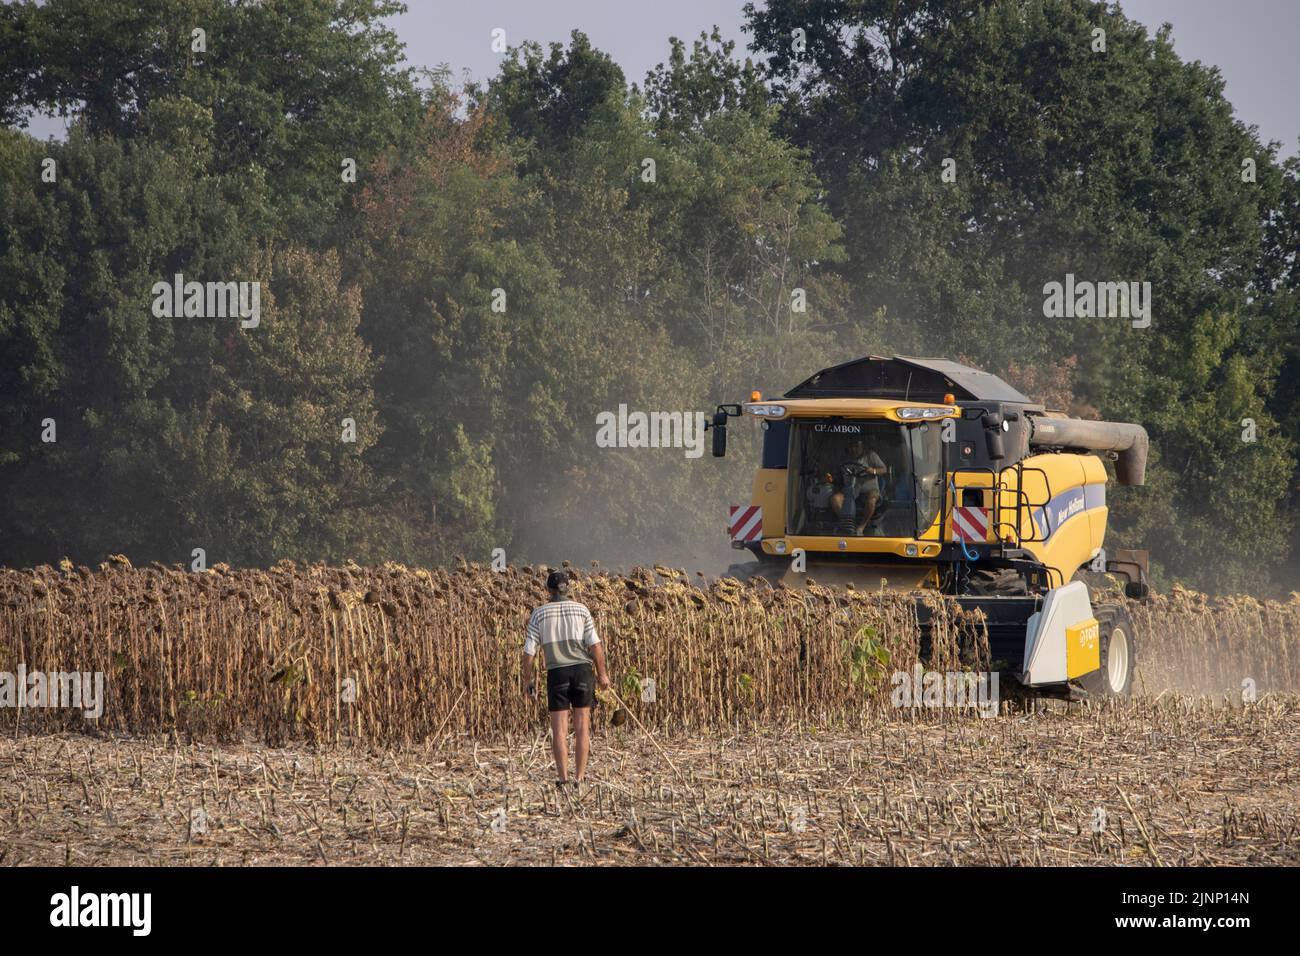 French farmers cultivating sunflower plants in the Dordogne region using a New Holland combine harverster CX0870 Stock Photo